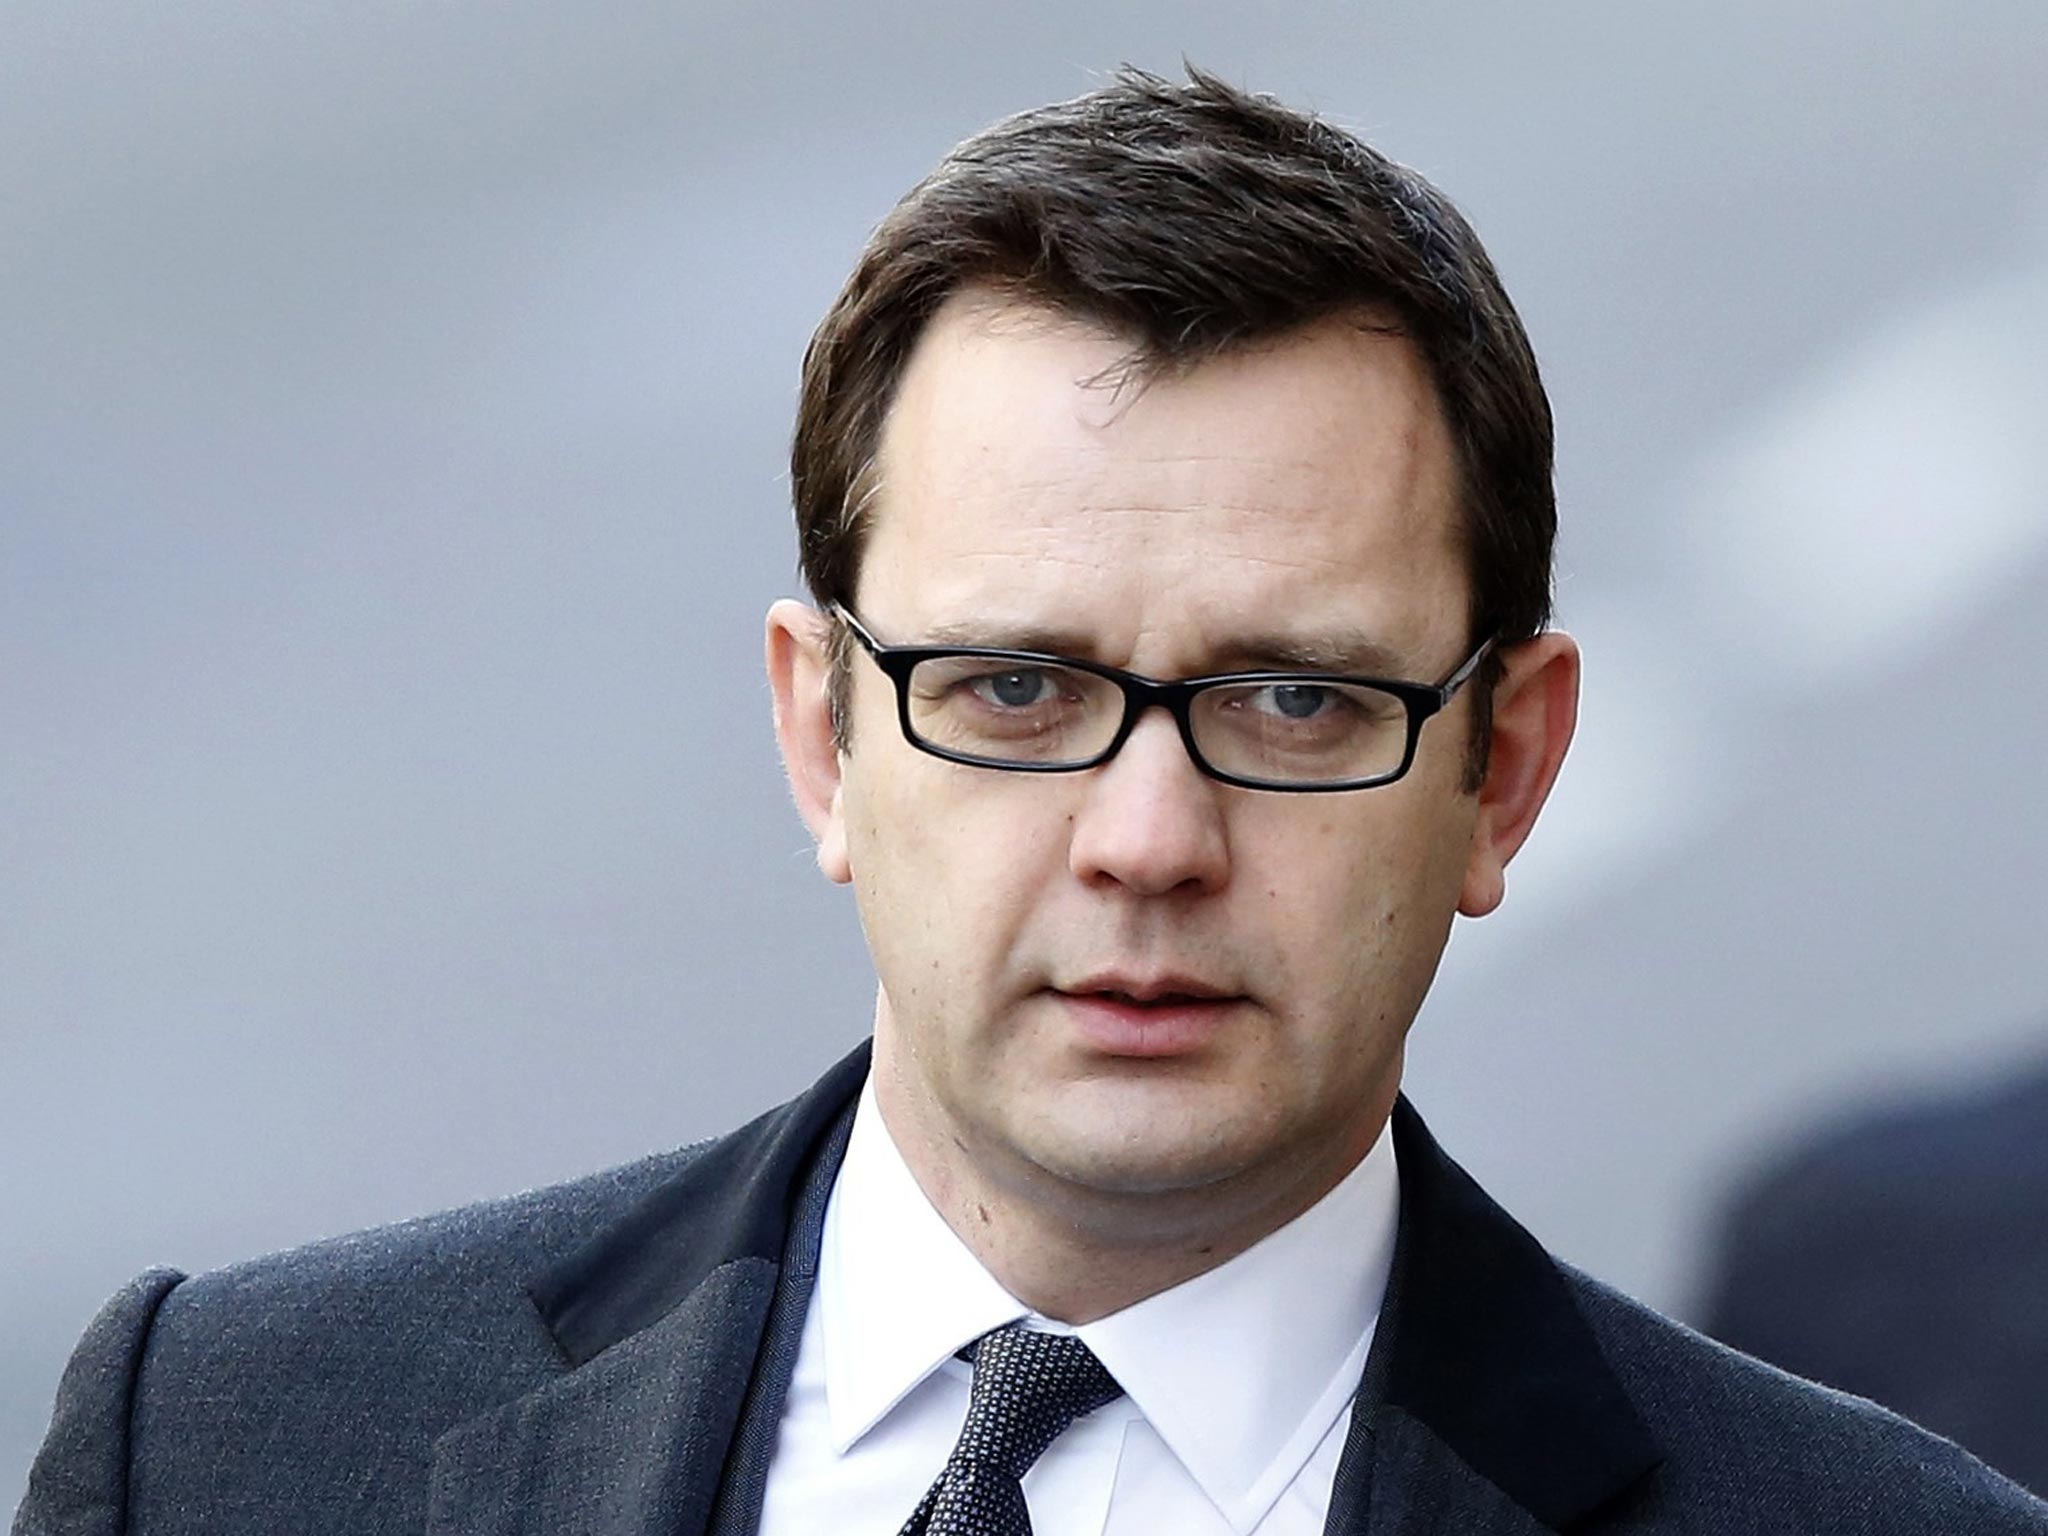 Former News of the World editor Andy Coulson arrives at the Old Bailey